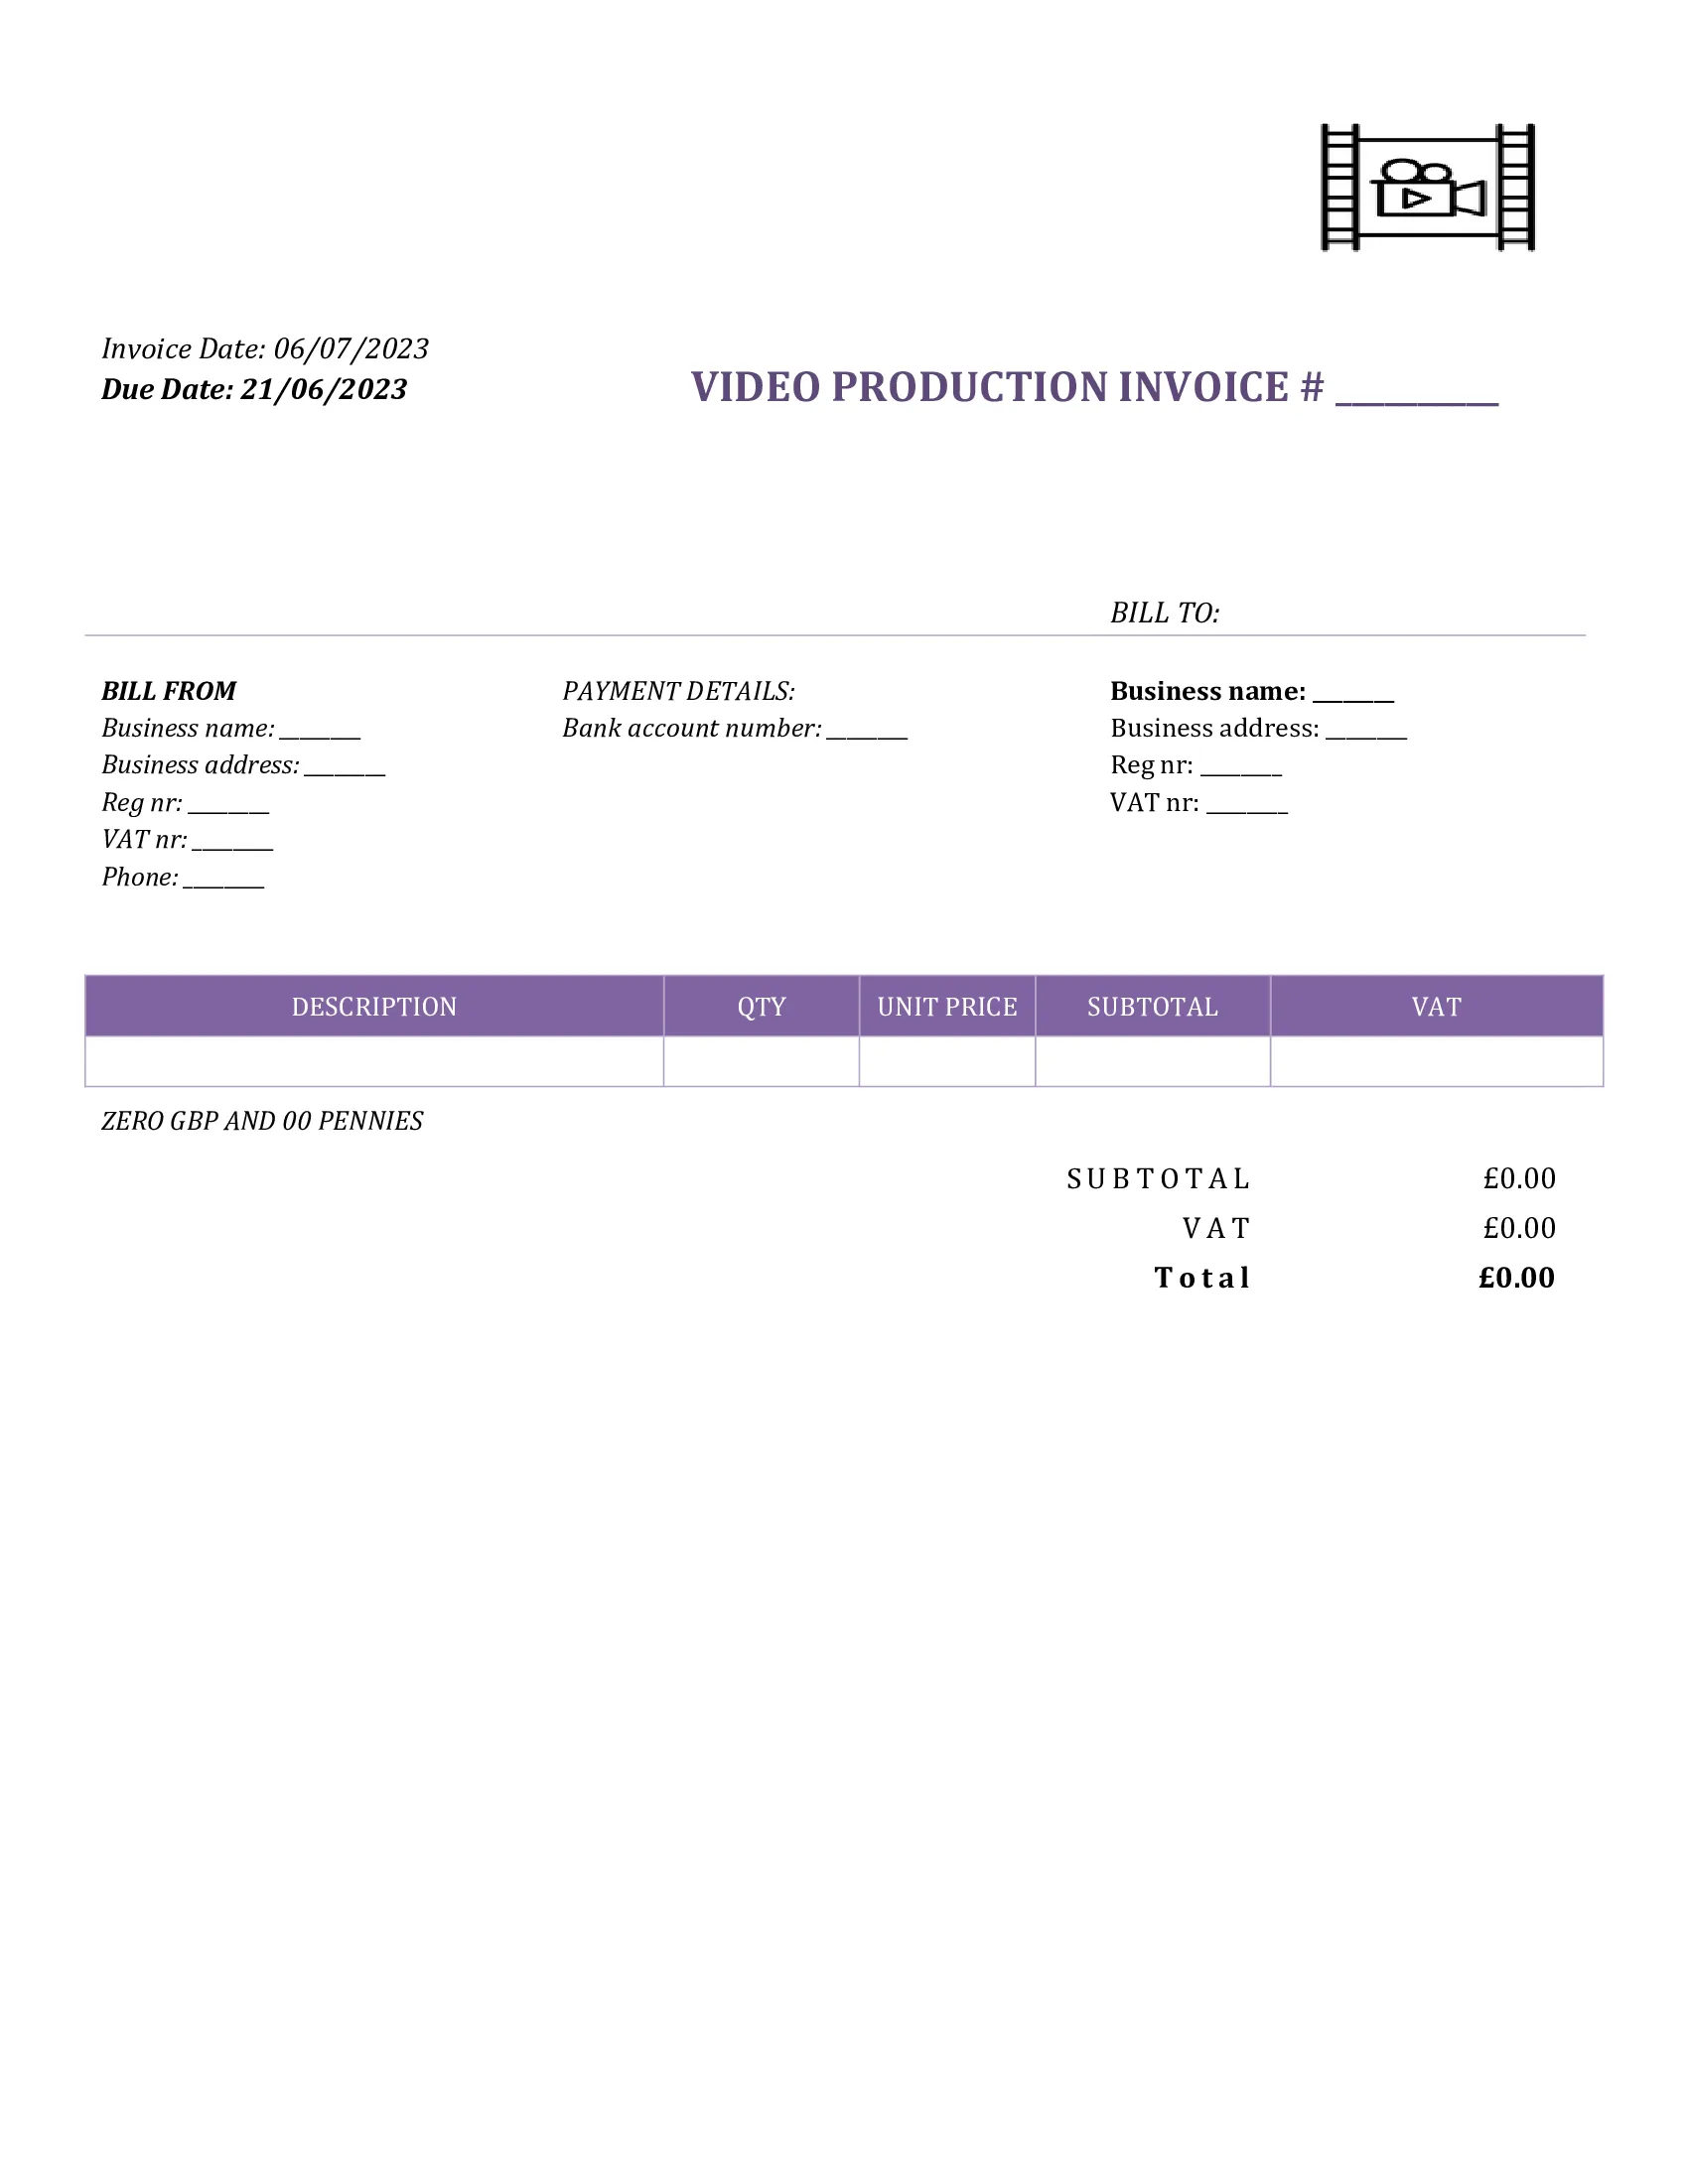 fillable video production invoice template UK Word / Google docs